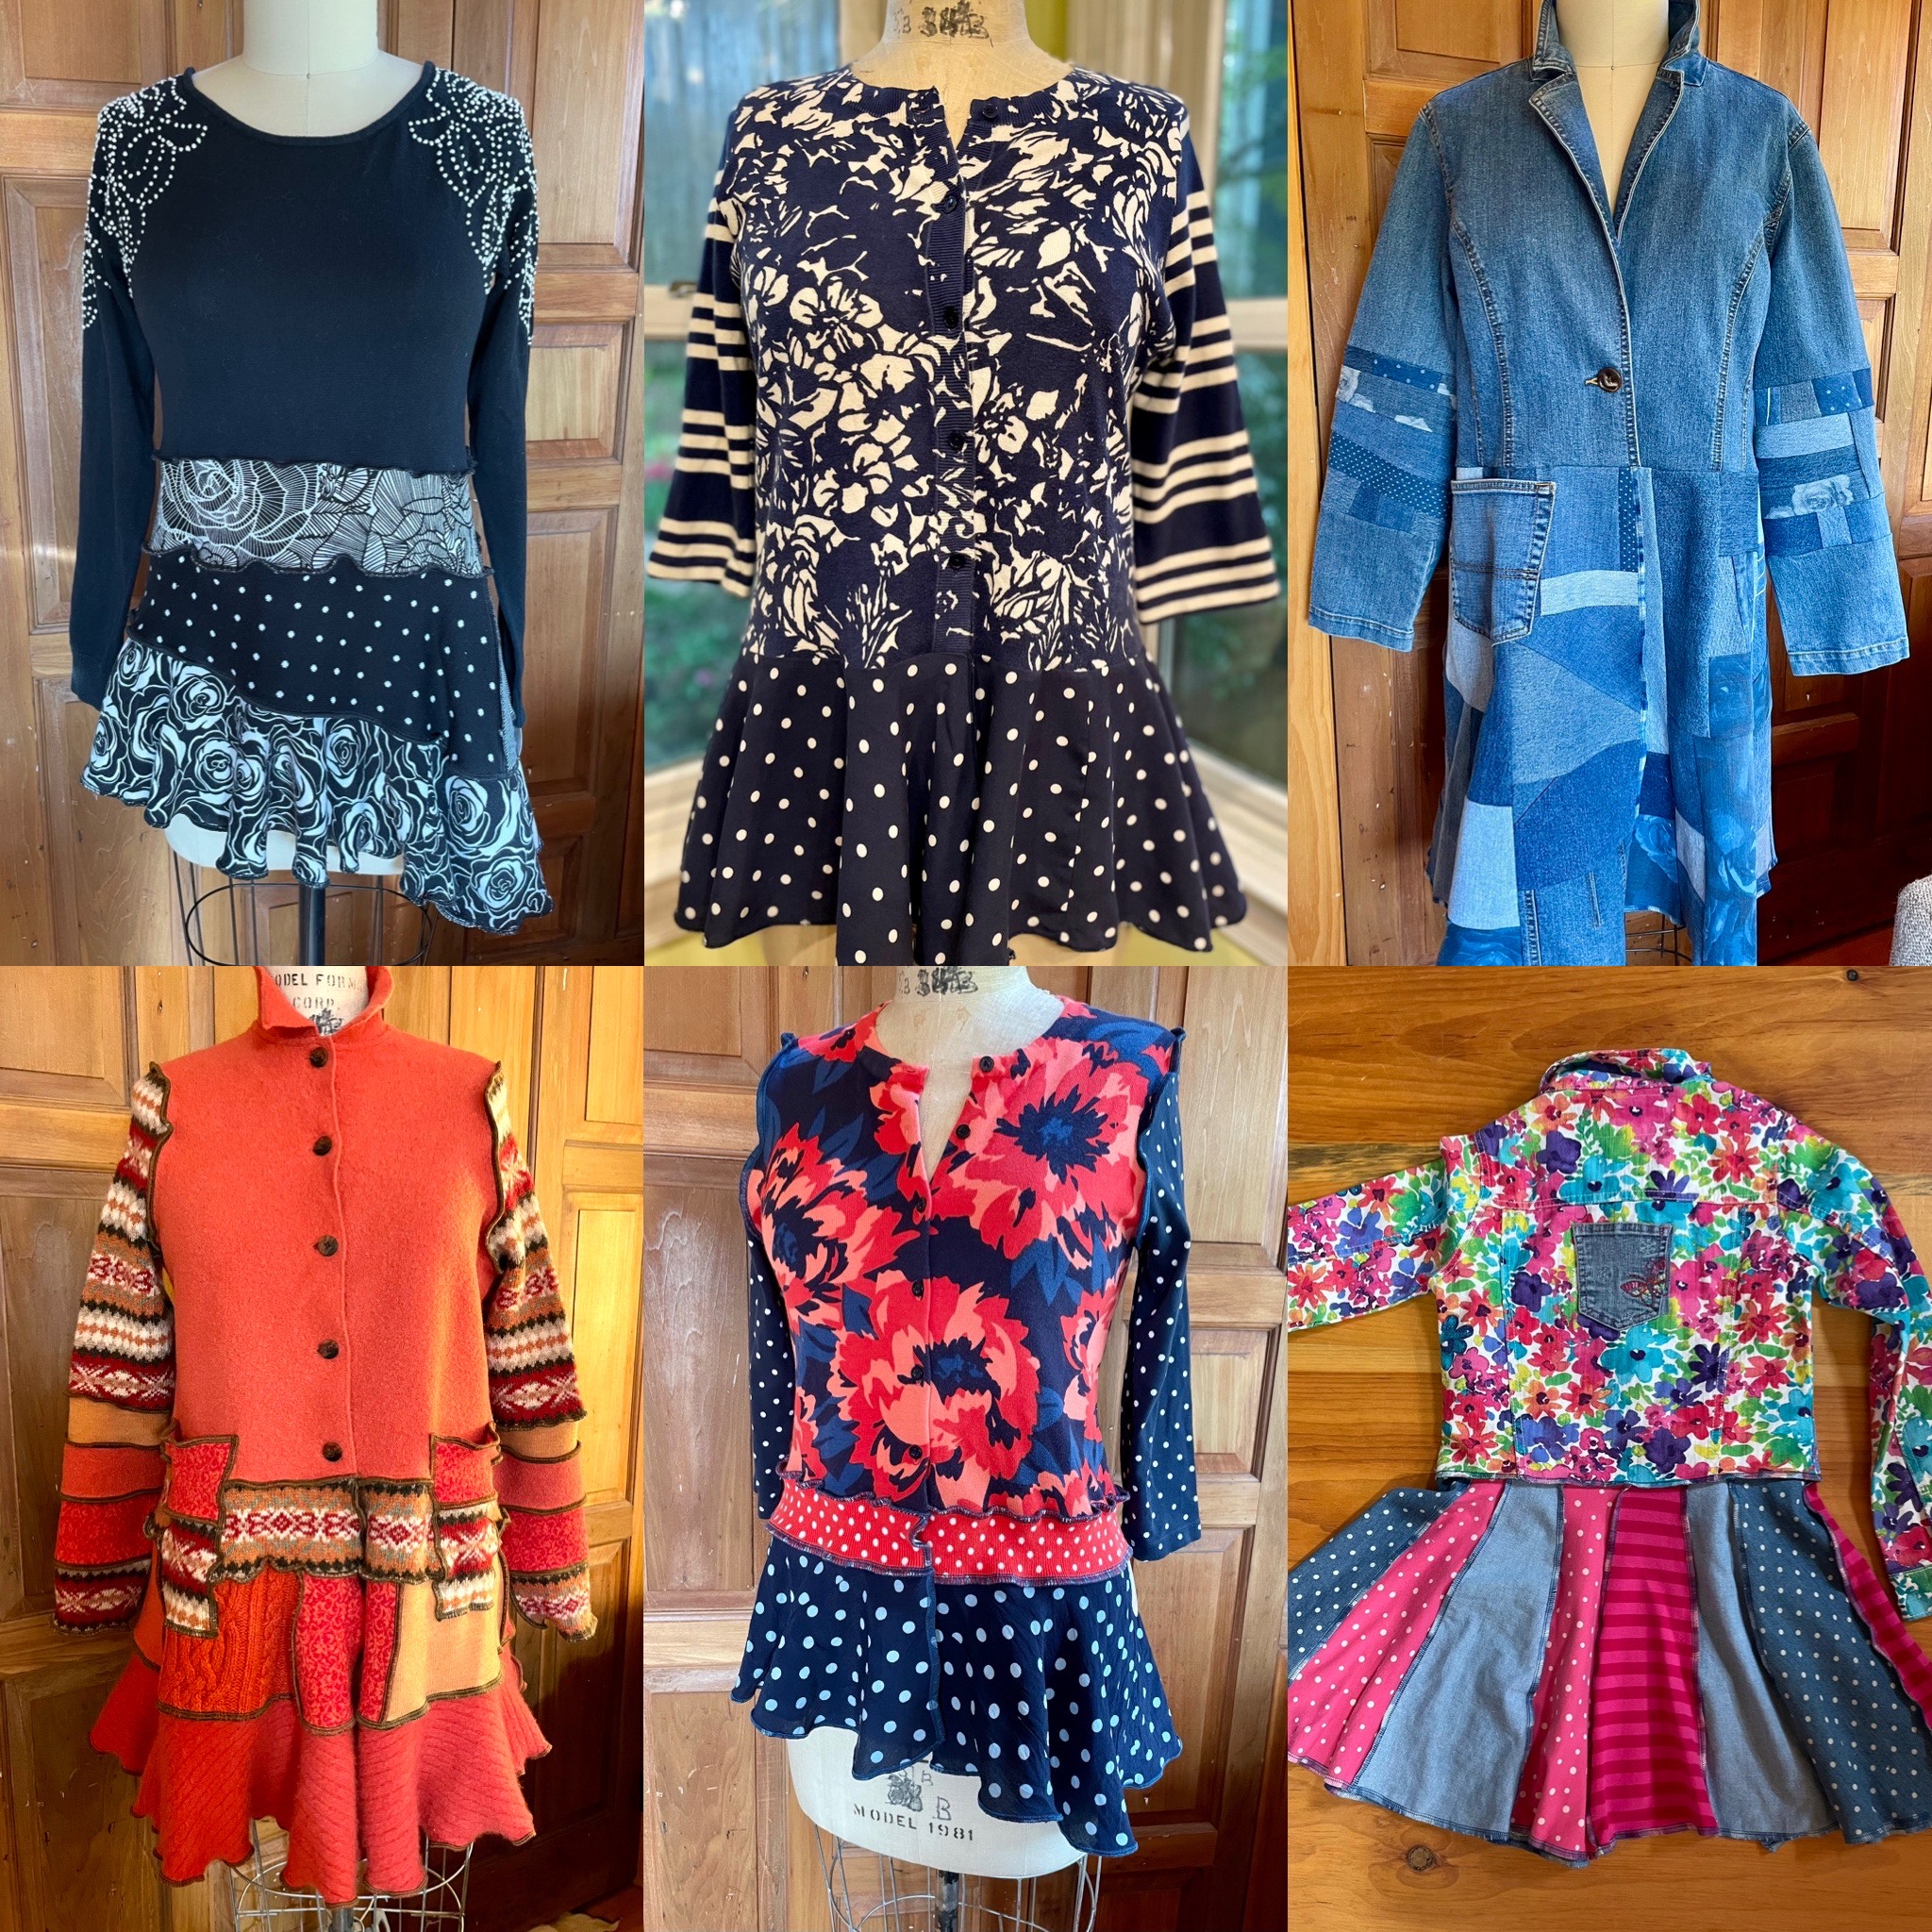 A selection of repurposed clothing by Nancy Plotsky.